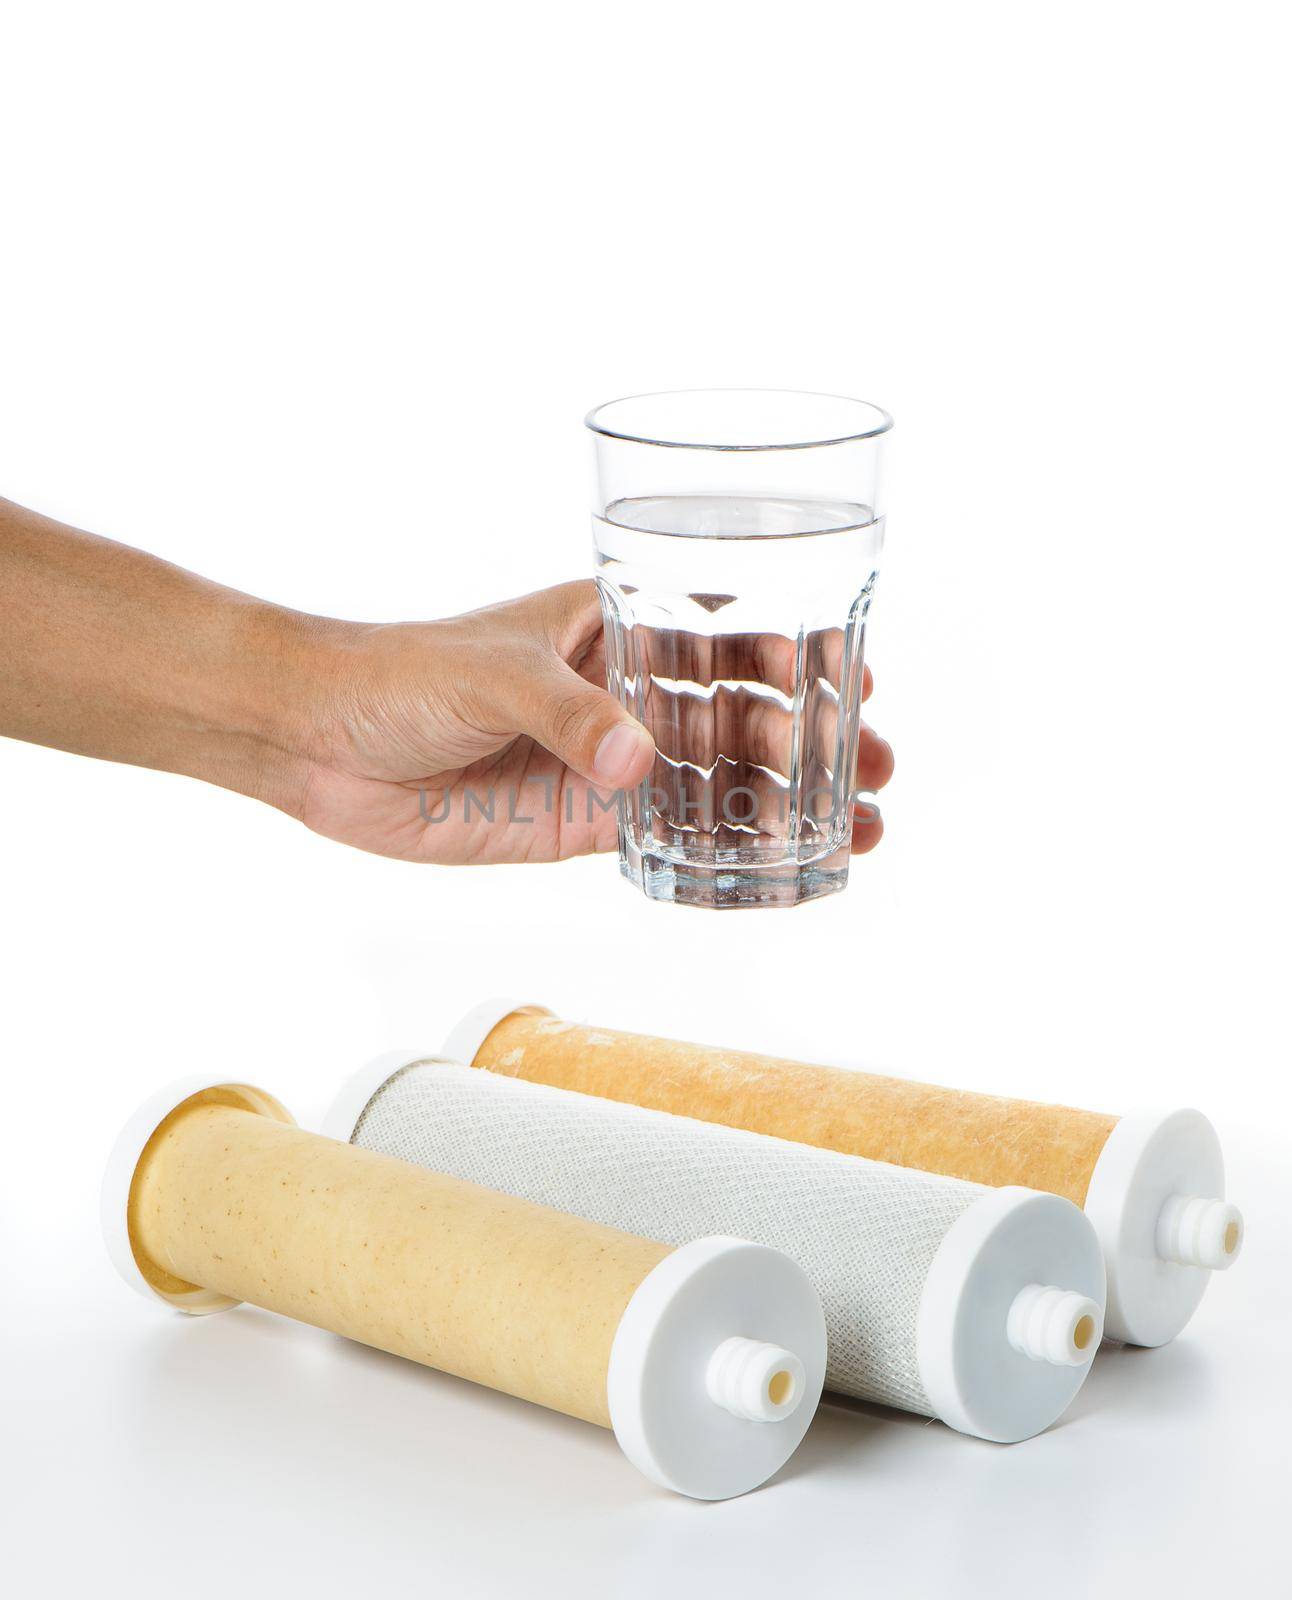 water filter by norgal